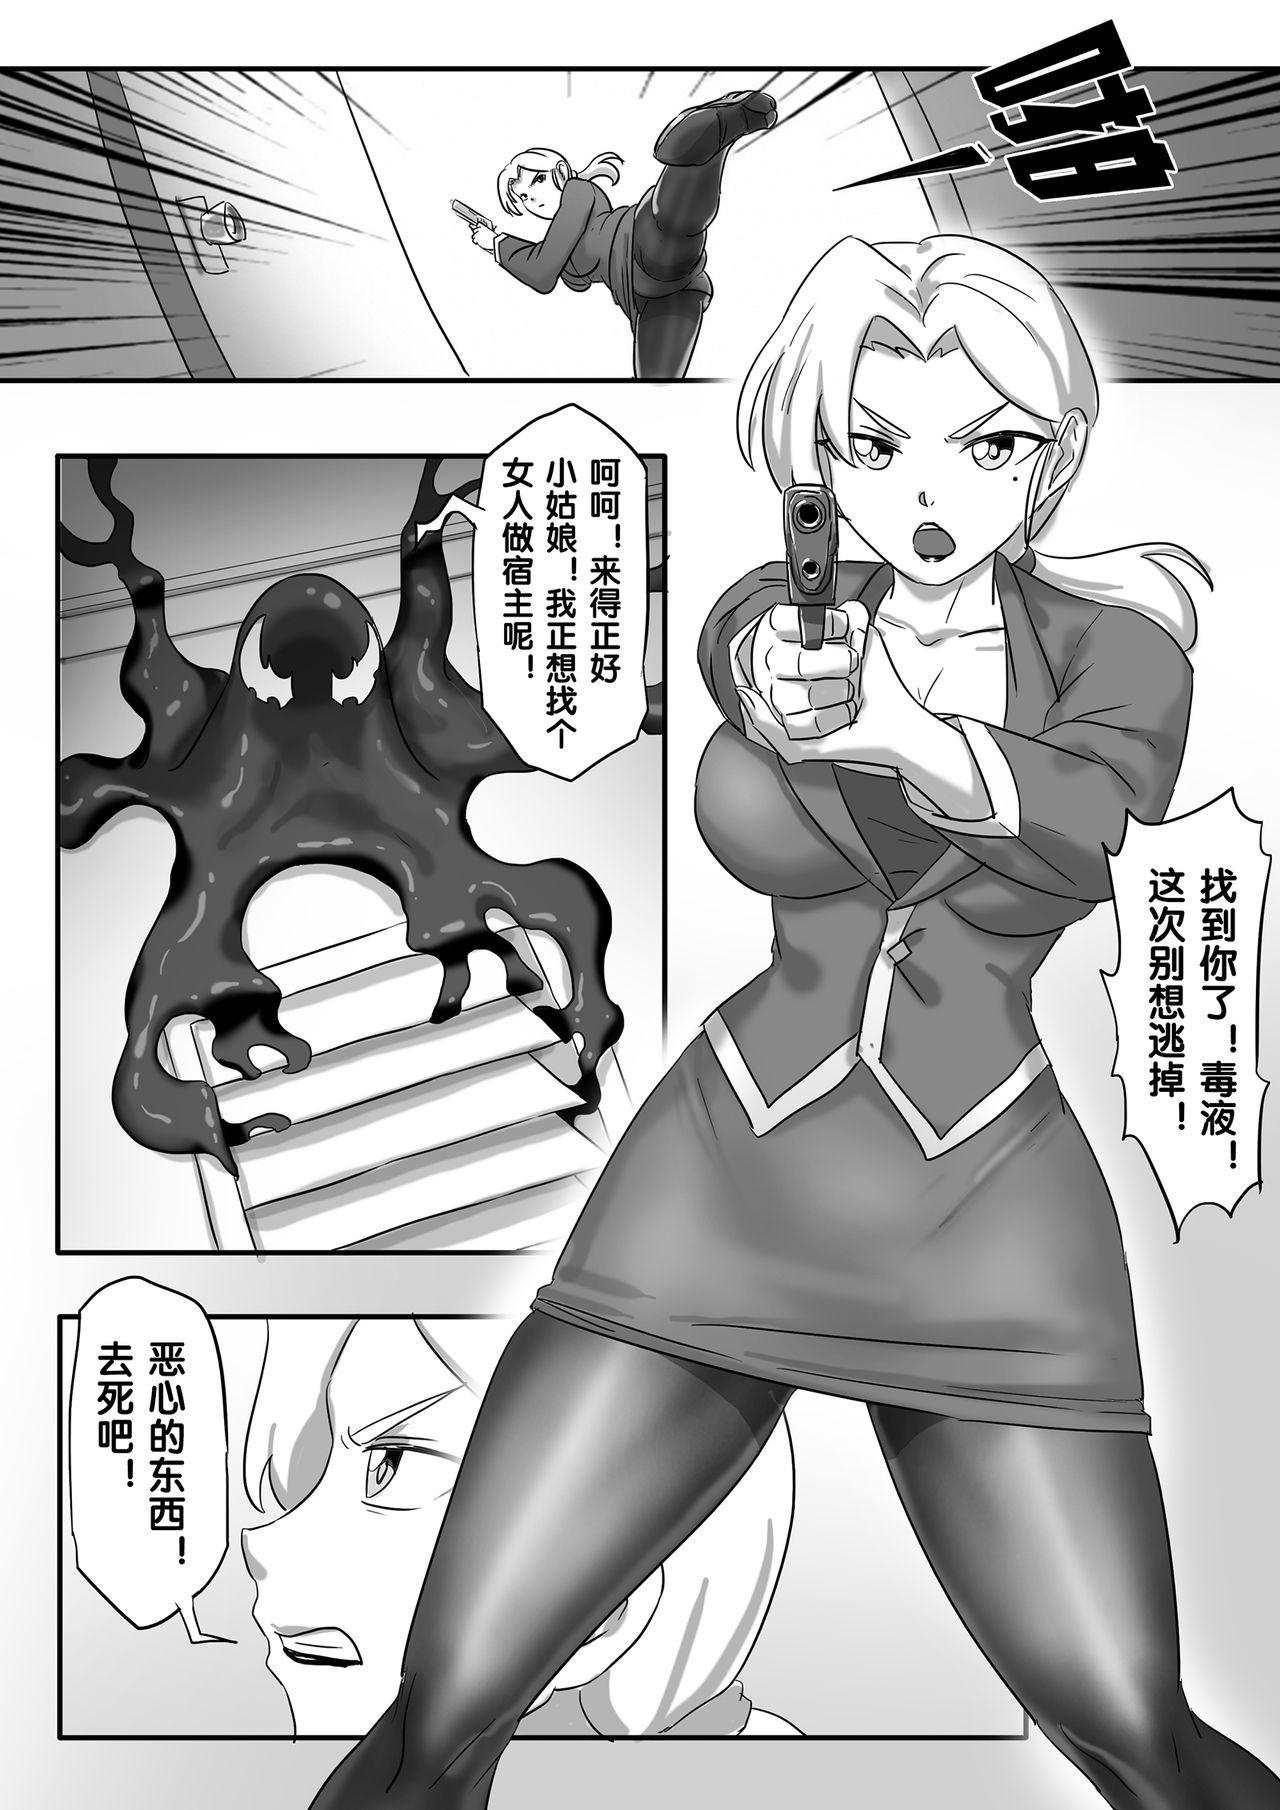 Latex [skyzen] 毒液--融合再生01 [Chinese] - Spider-man Girl Fuck - Page 2